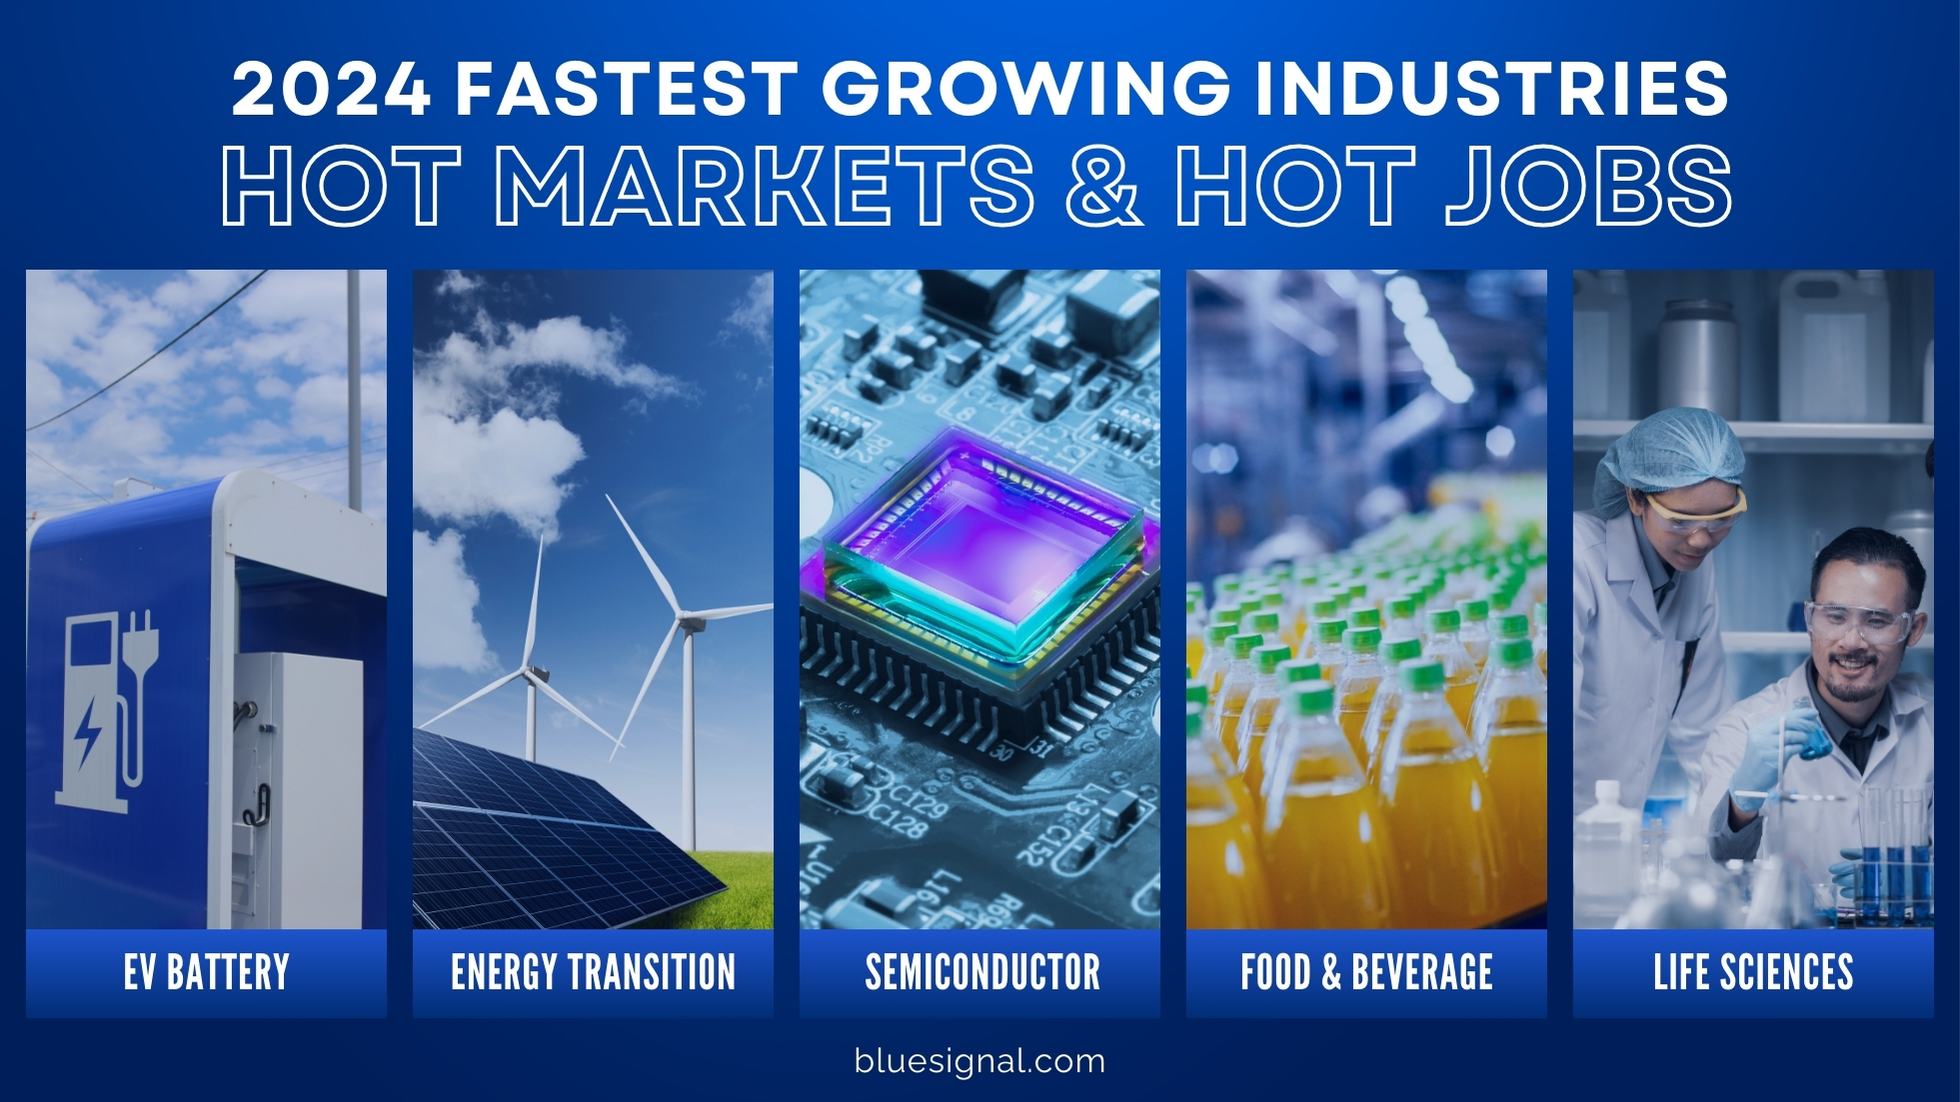 Collage of the 2024 fastest growing industries: EV Battery, Energy Transition, Semiconductor, Food & Beverage, and Life Sciences.